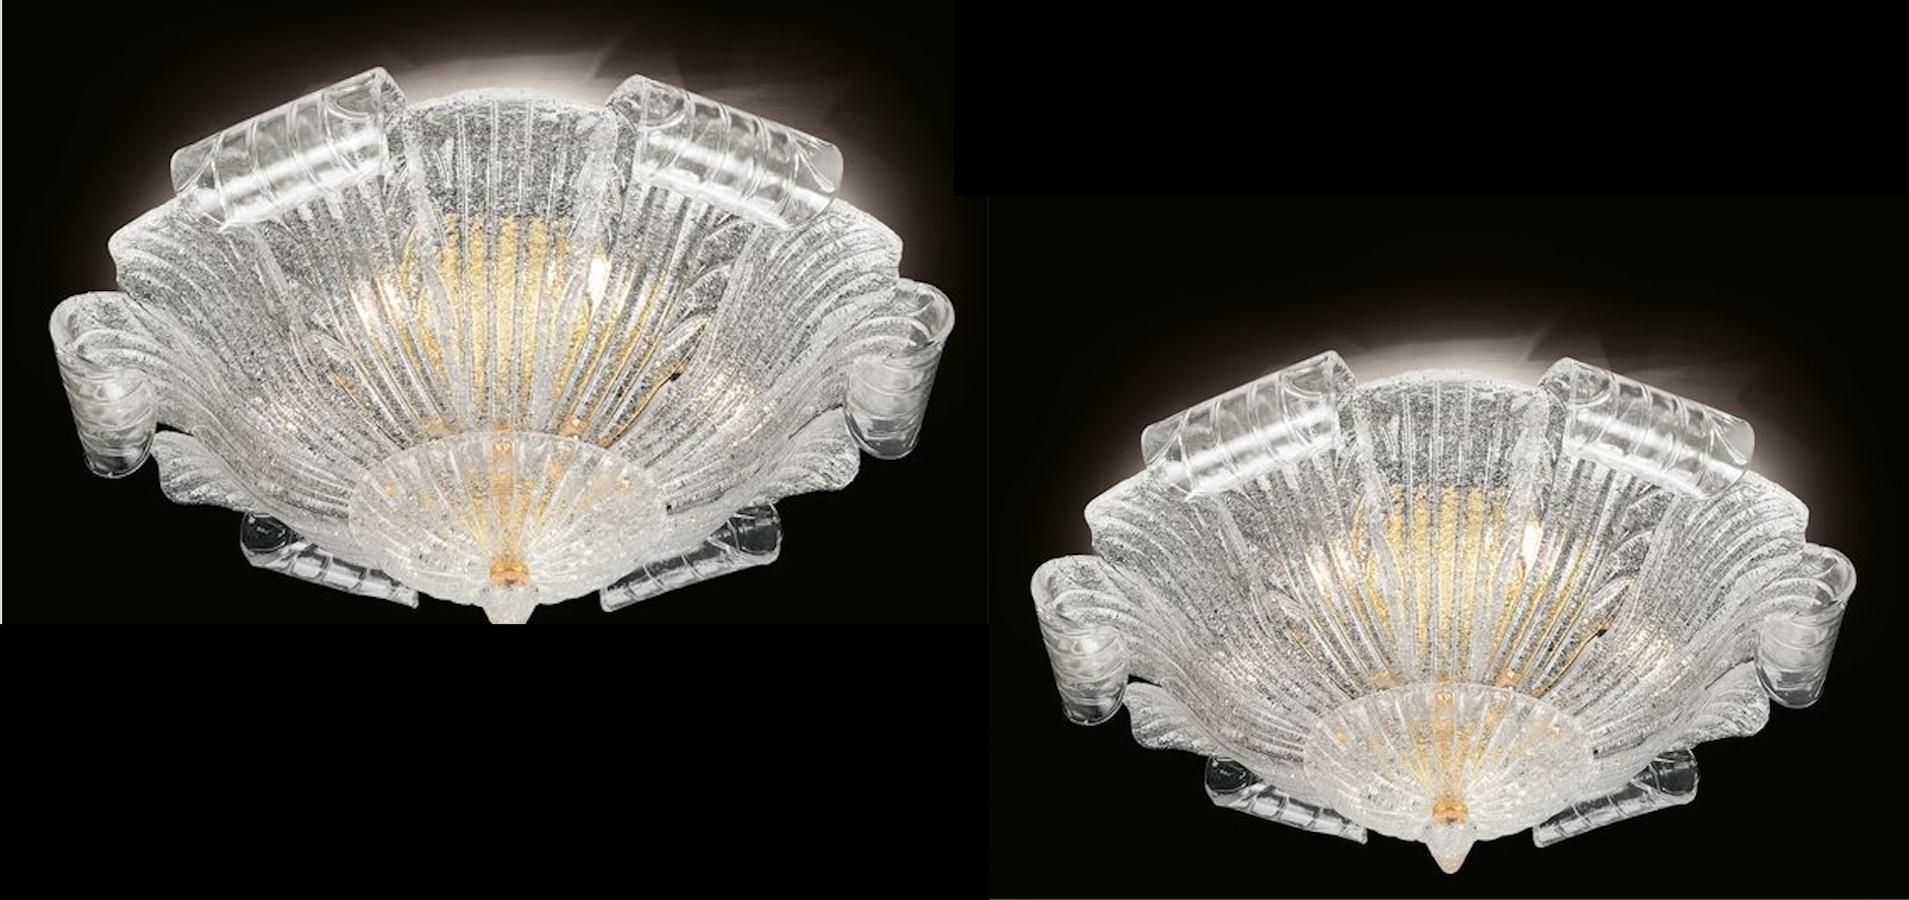 This ceiling light realized in pure Murano glass large leaves with amazing 24-carat gold-plated structure and canopy.
This beautiful ceiling light gives an elegant ambience a special flair and is an absolute eyecatcher even when switched off.
Five